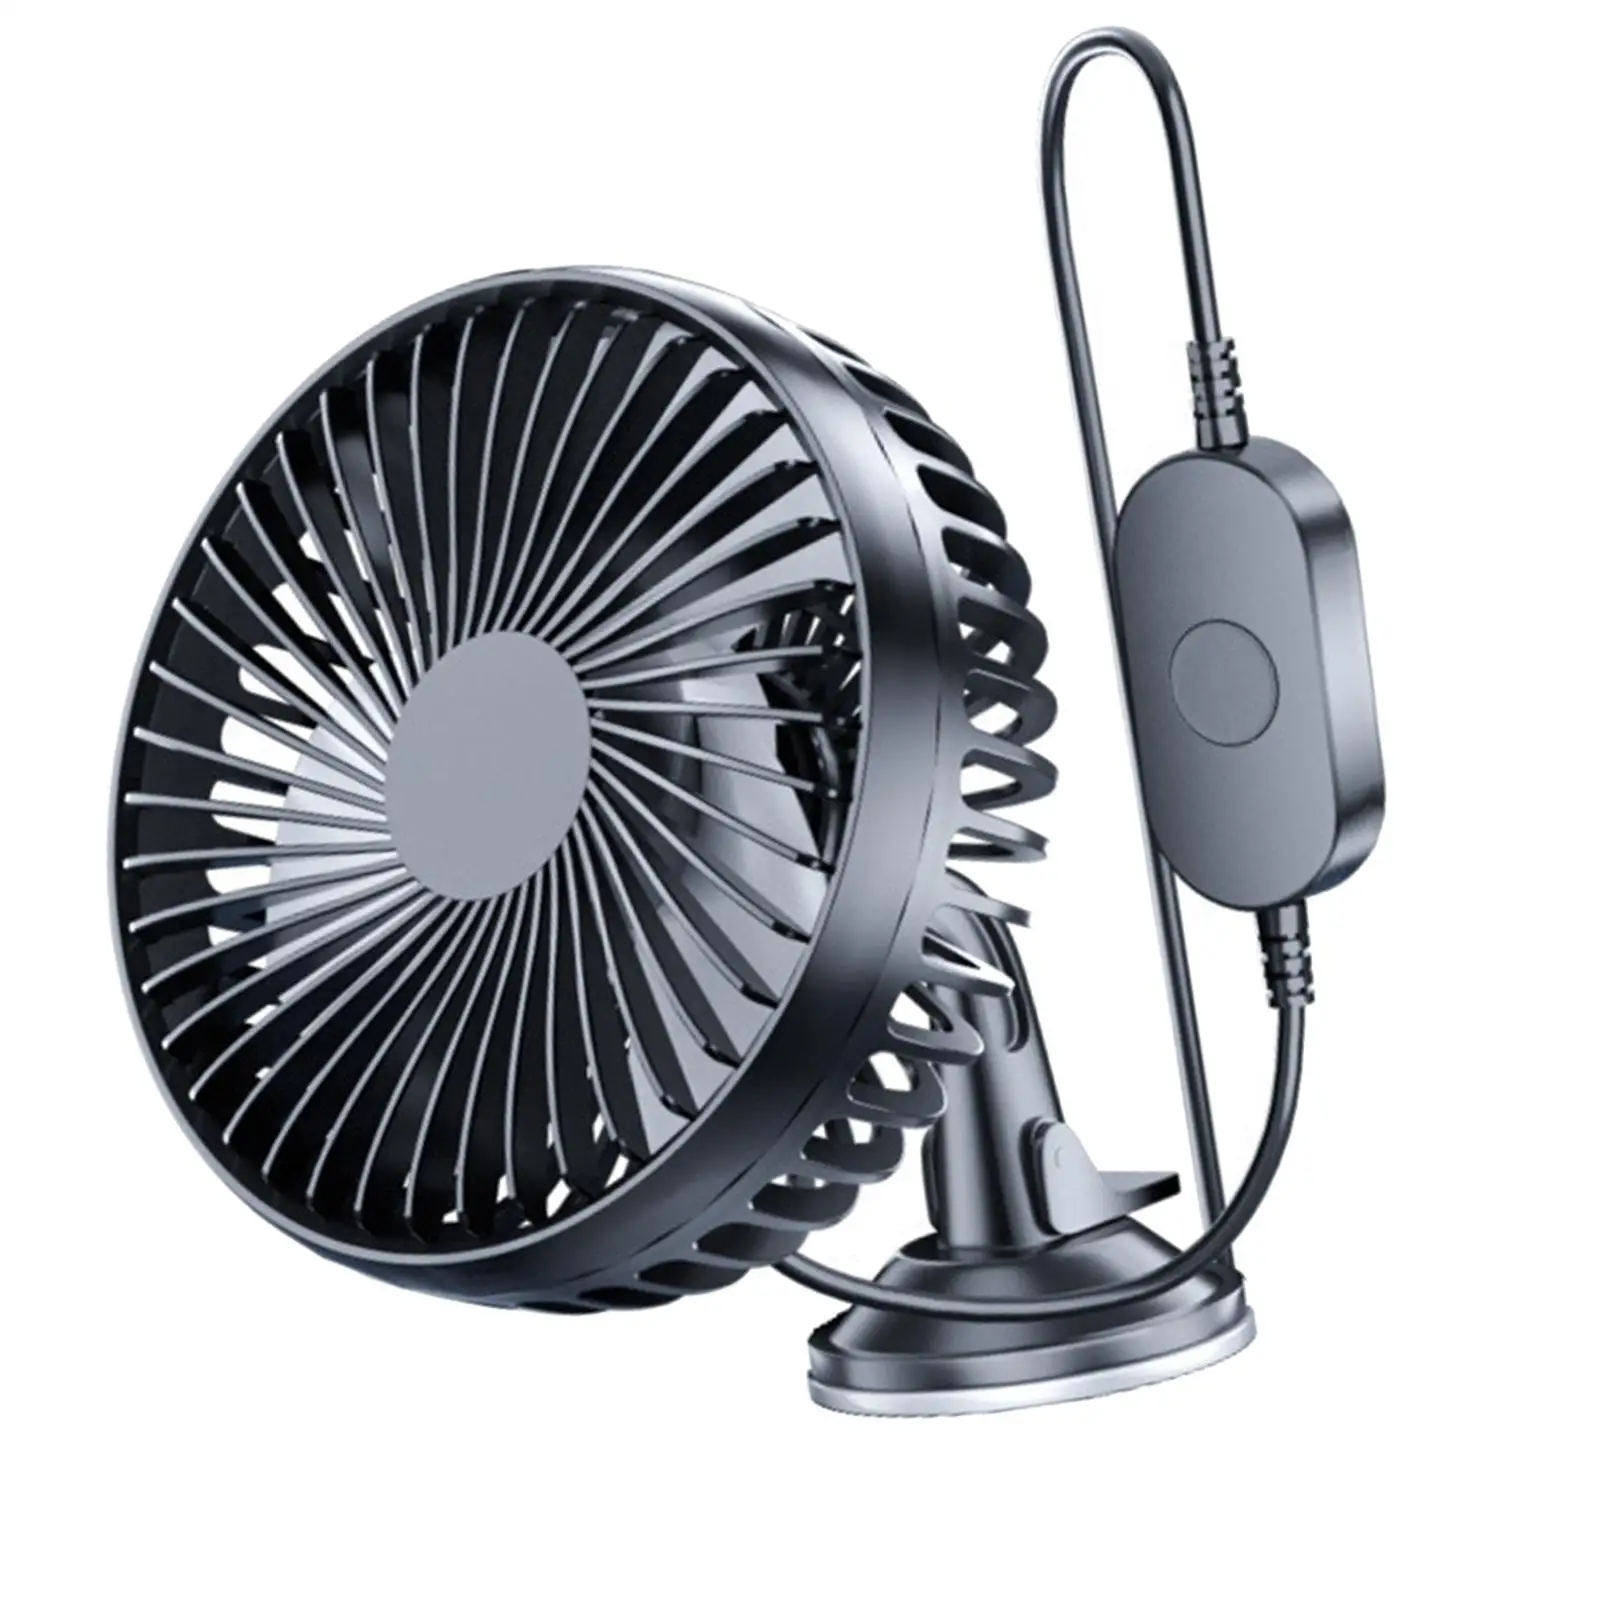 Electric Car Cooling Fan 12V 24V USB for Automobile Office and Home Use Accessories Lightweight Sturdy Tilt Adjustment 3 Speed